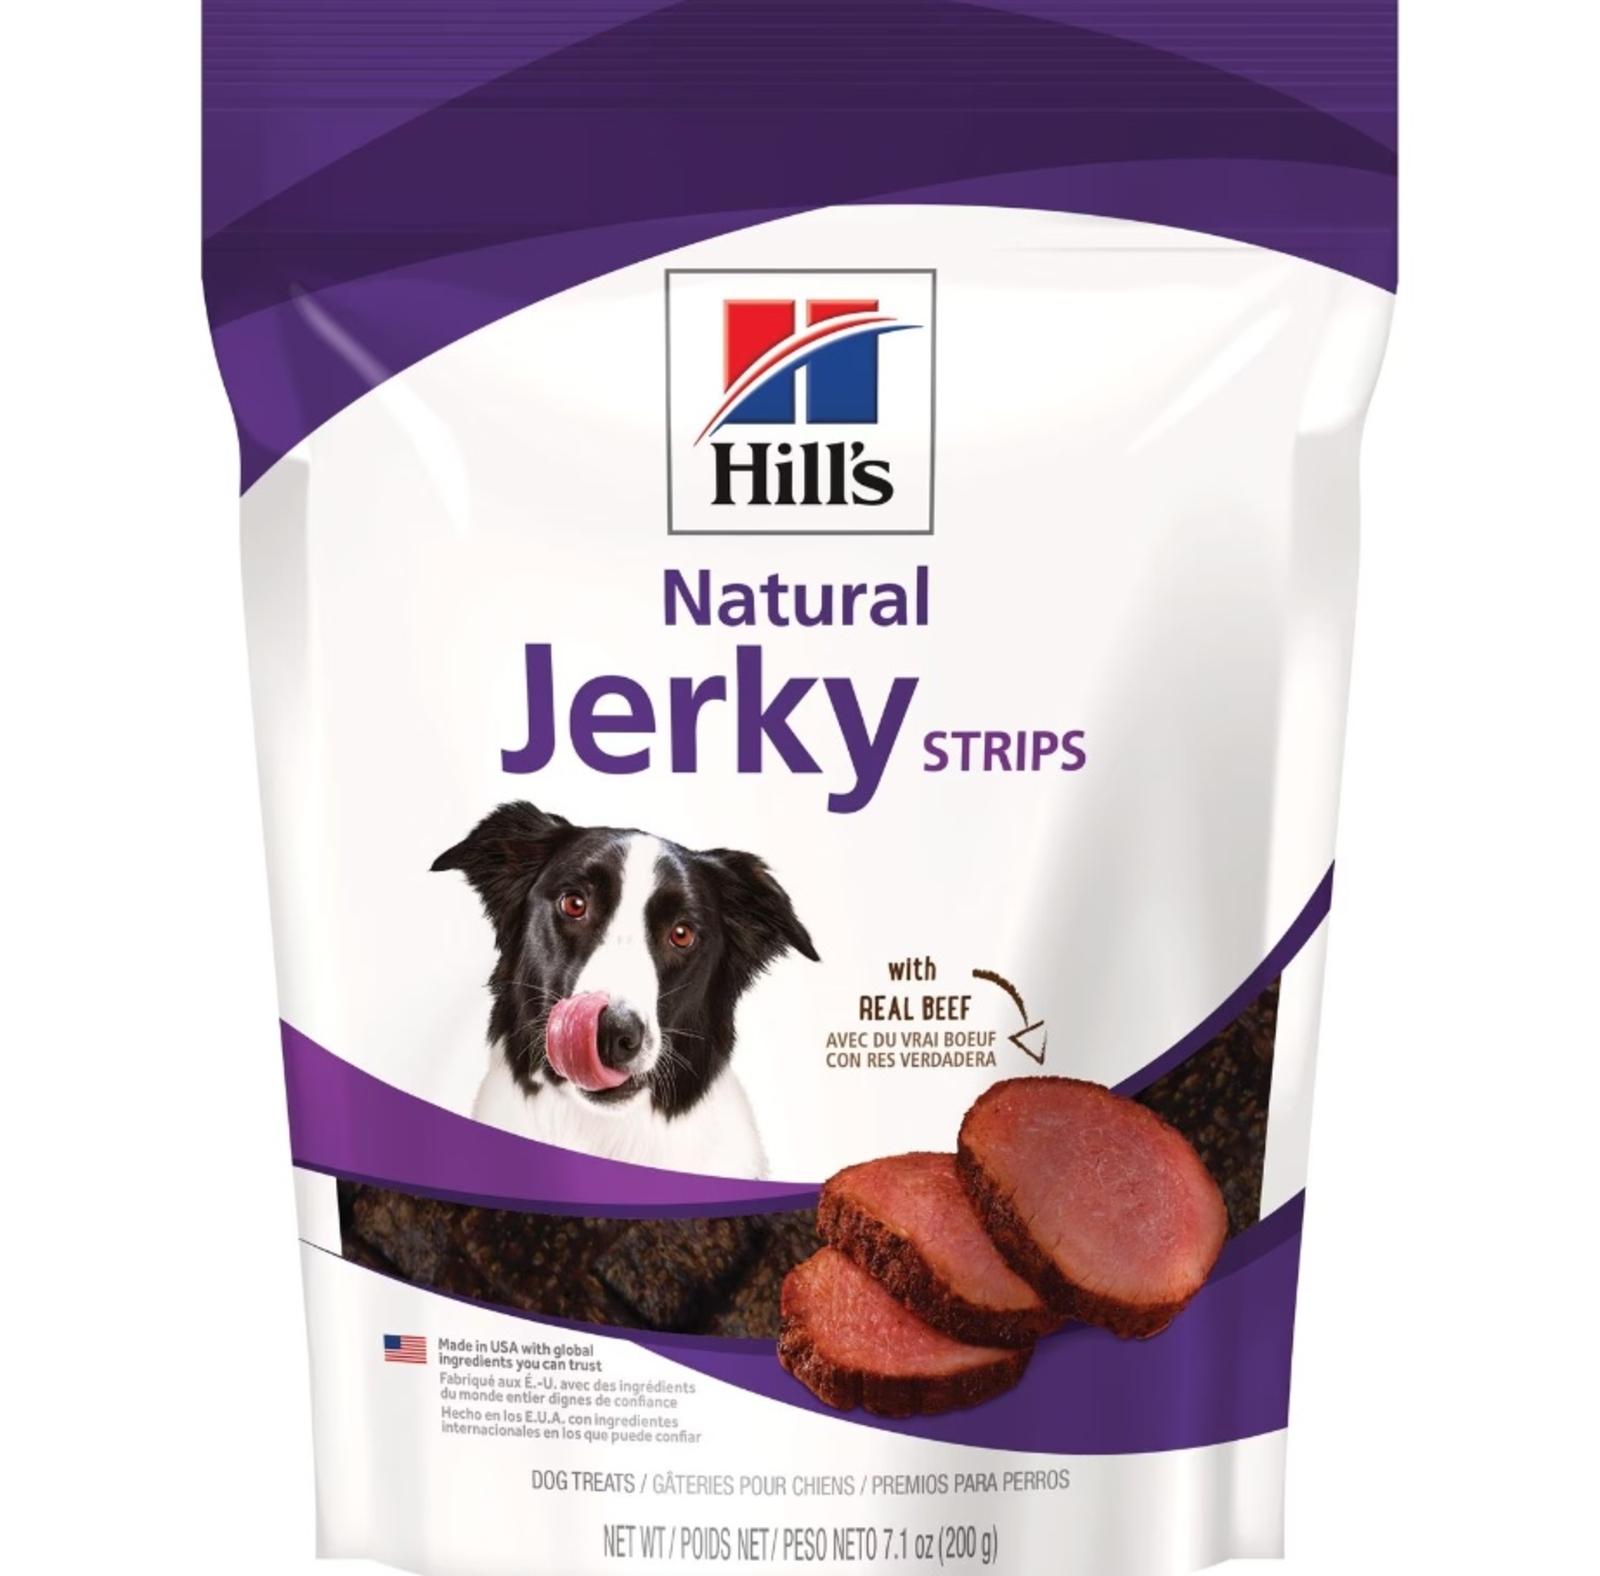 Hill's Natural Jerky Strips with Real Beef Dog Treats